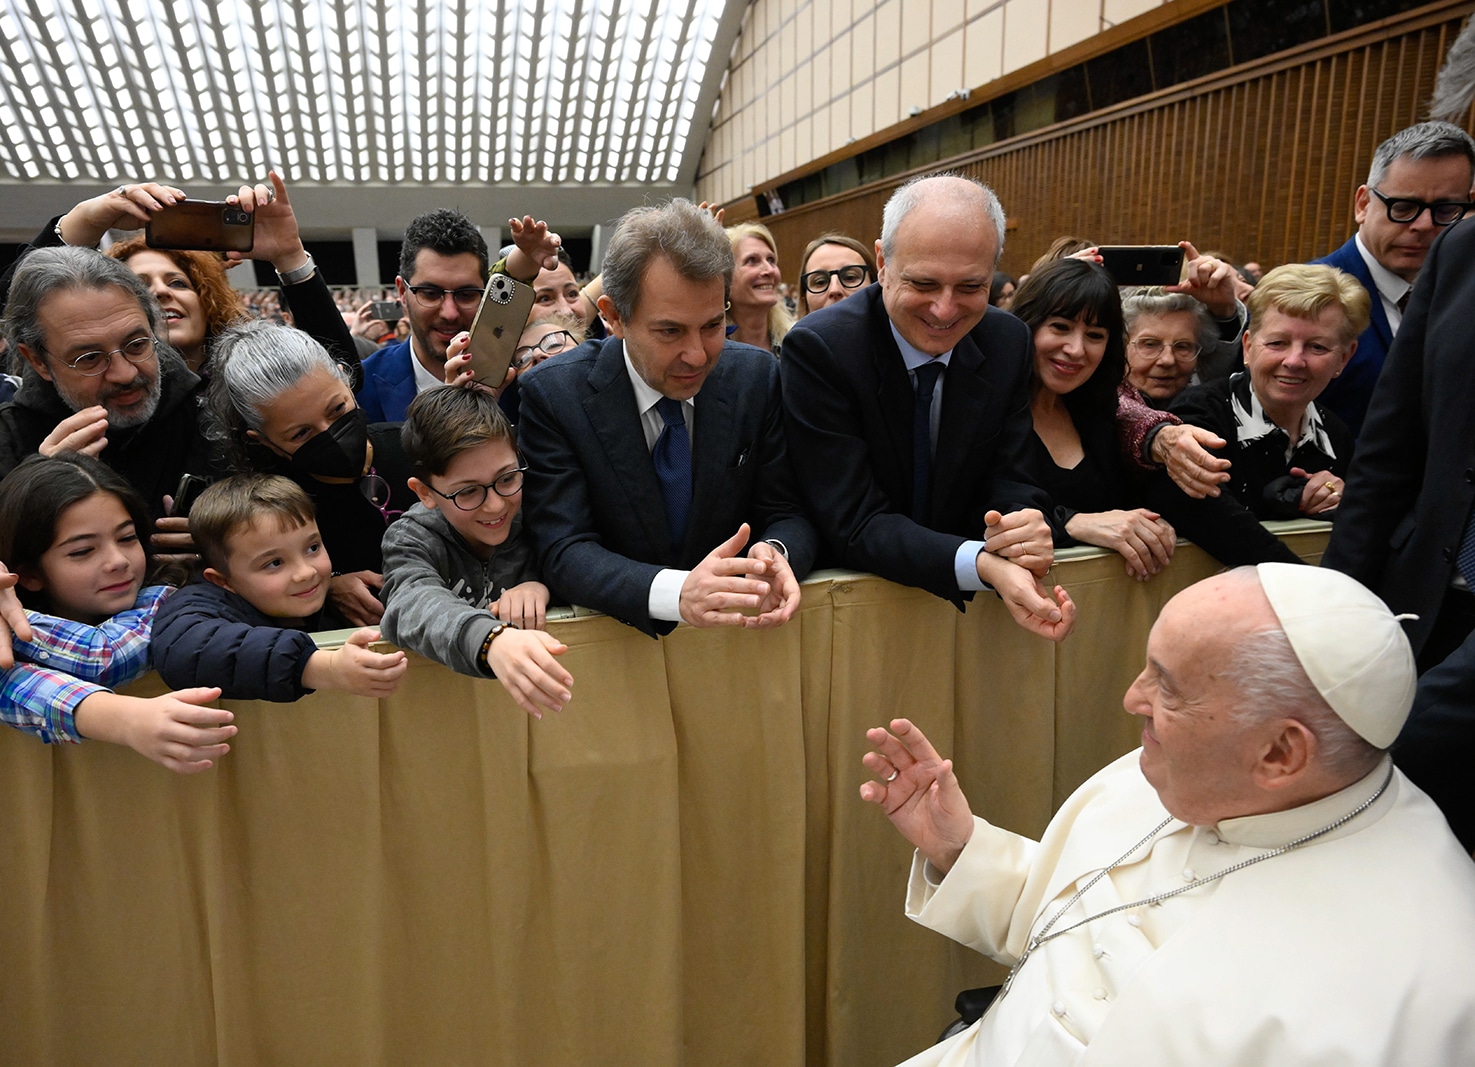 POPE FRANCIS WITH RAI EMPLOYEES